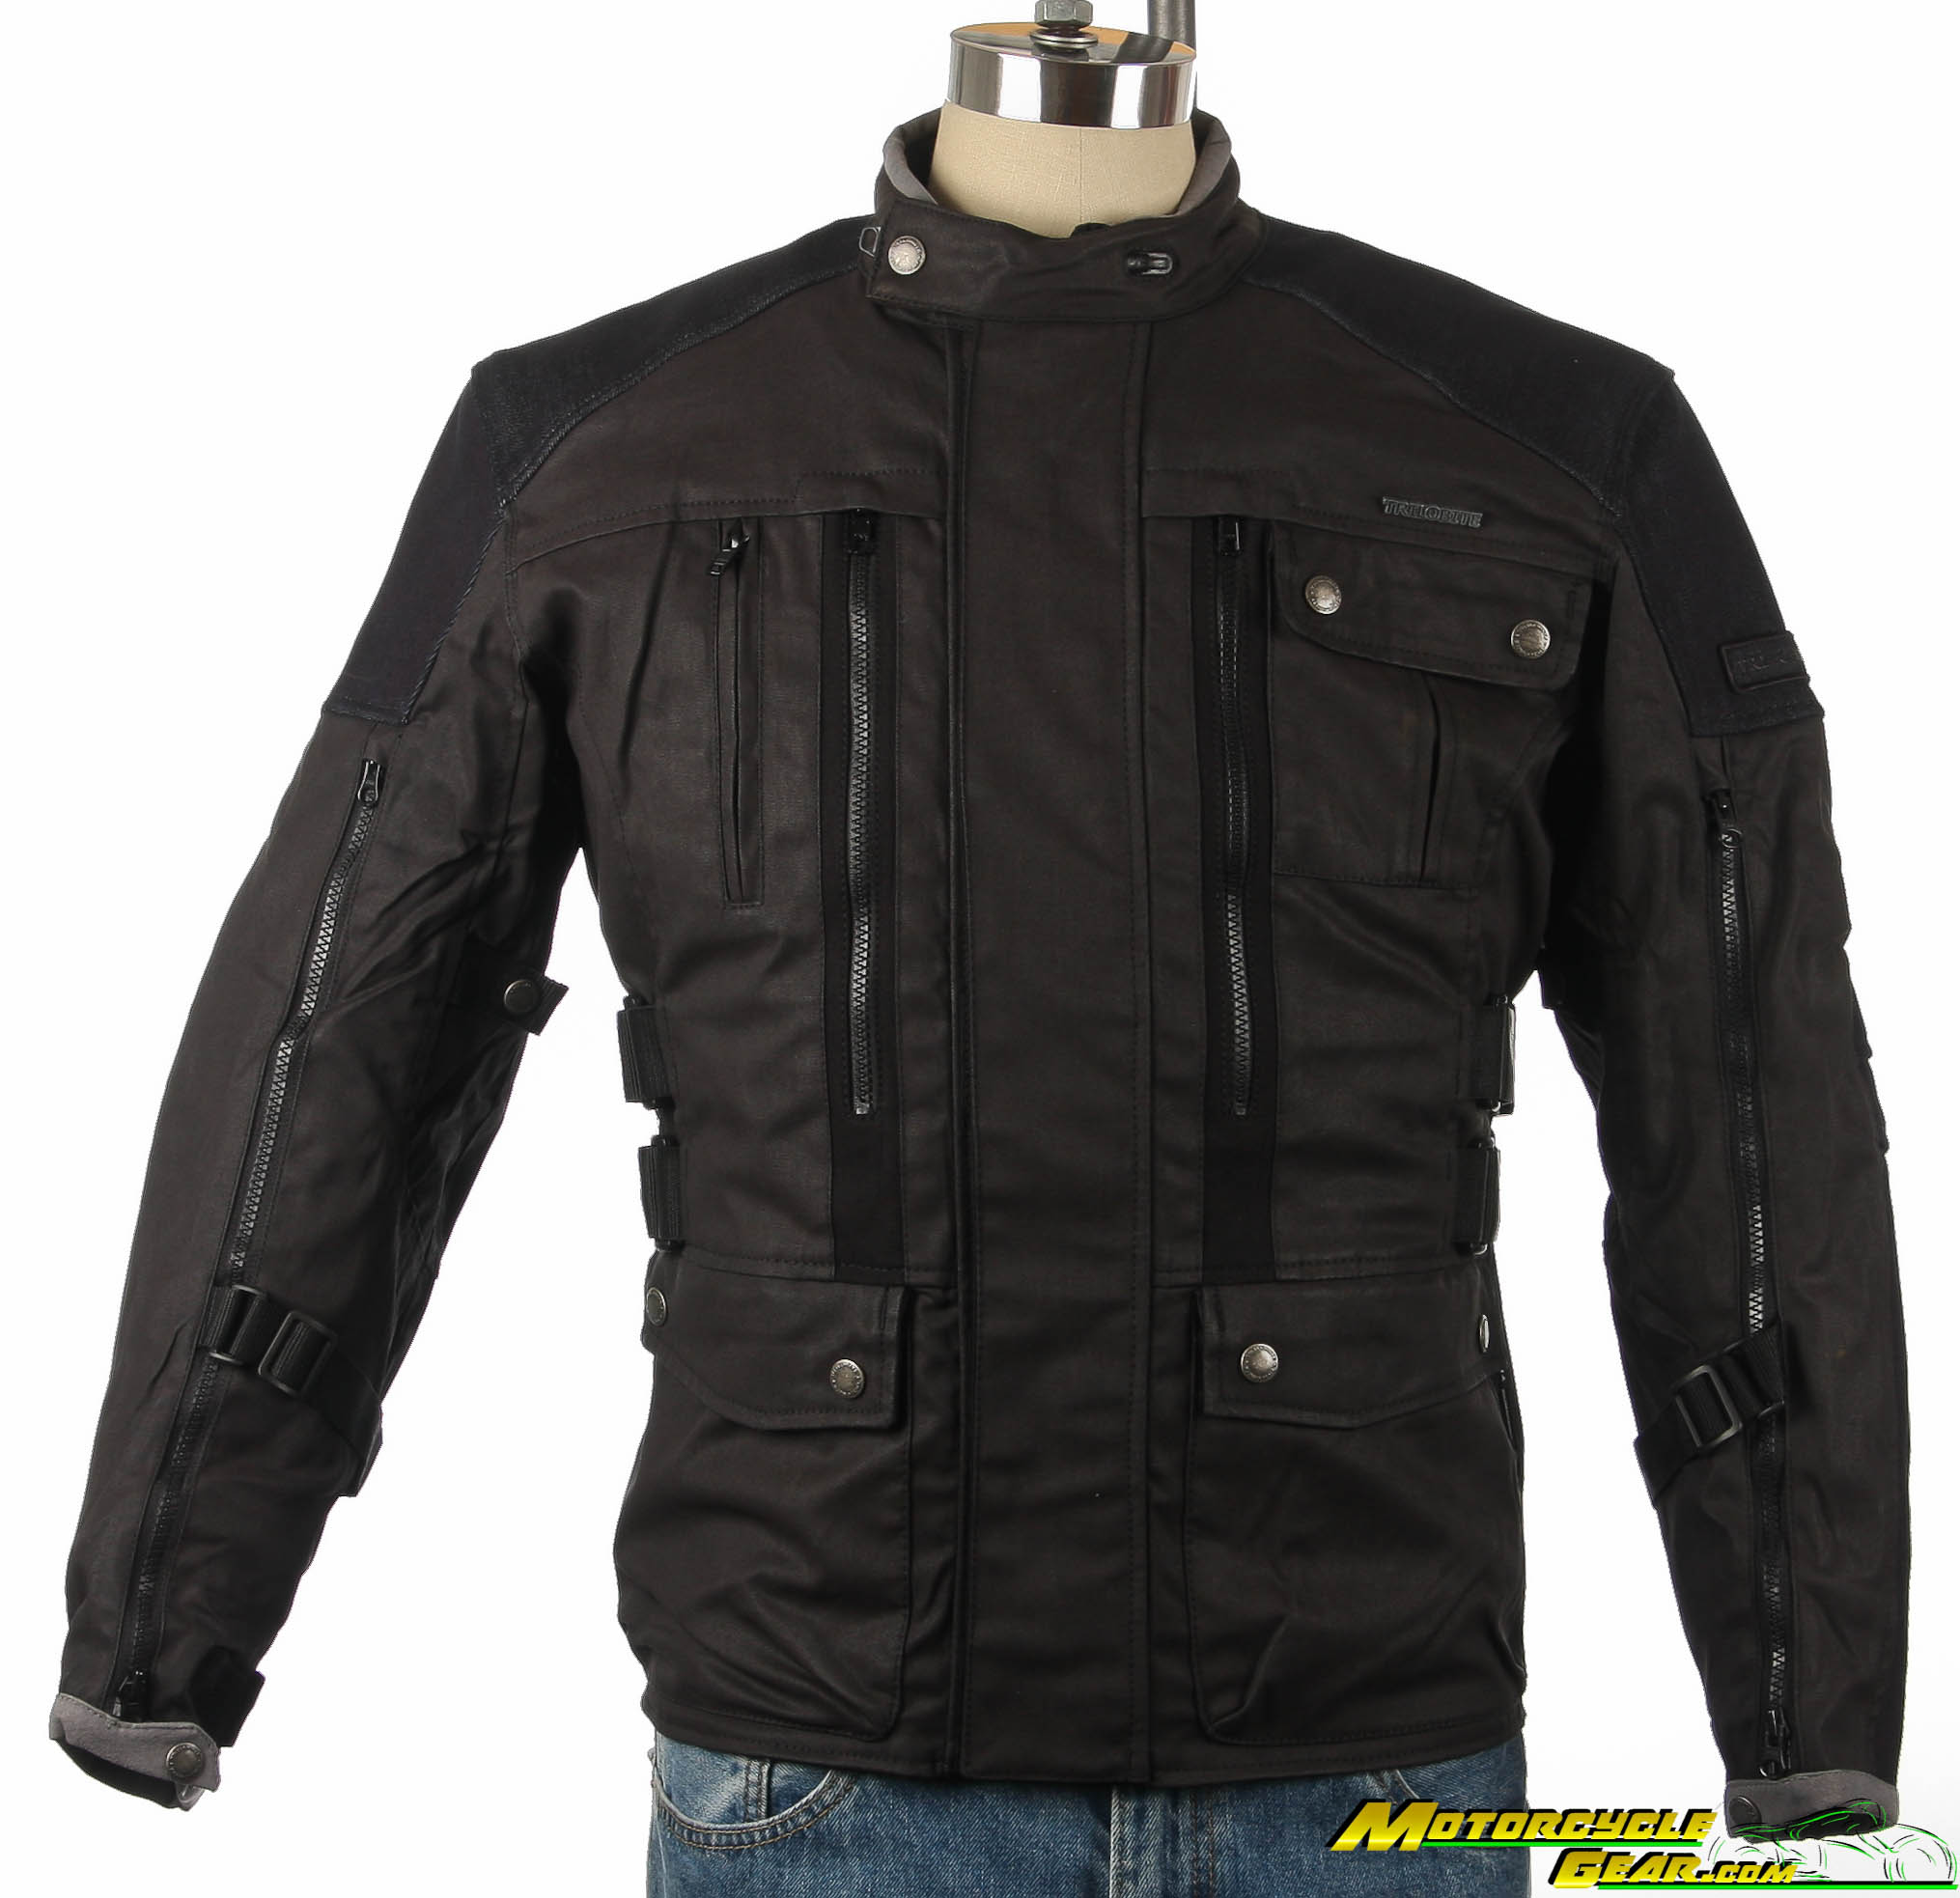 Viewing Images For Trilobite Rally Jacket :: MotorcycleGear.com